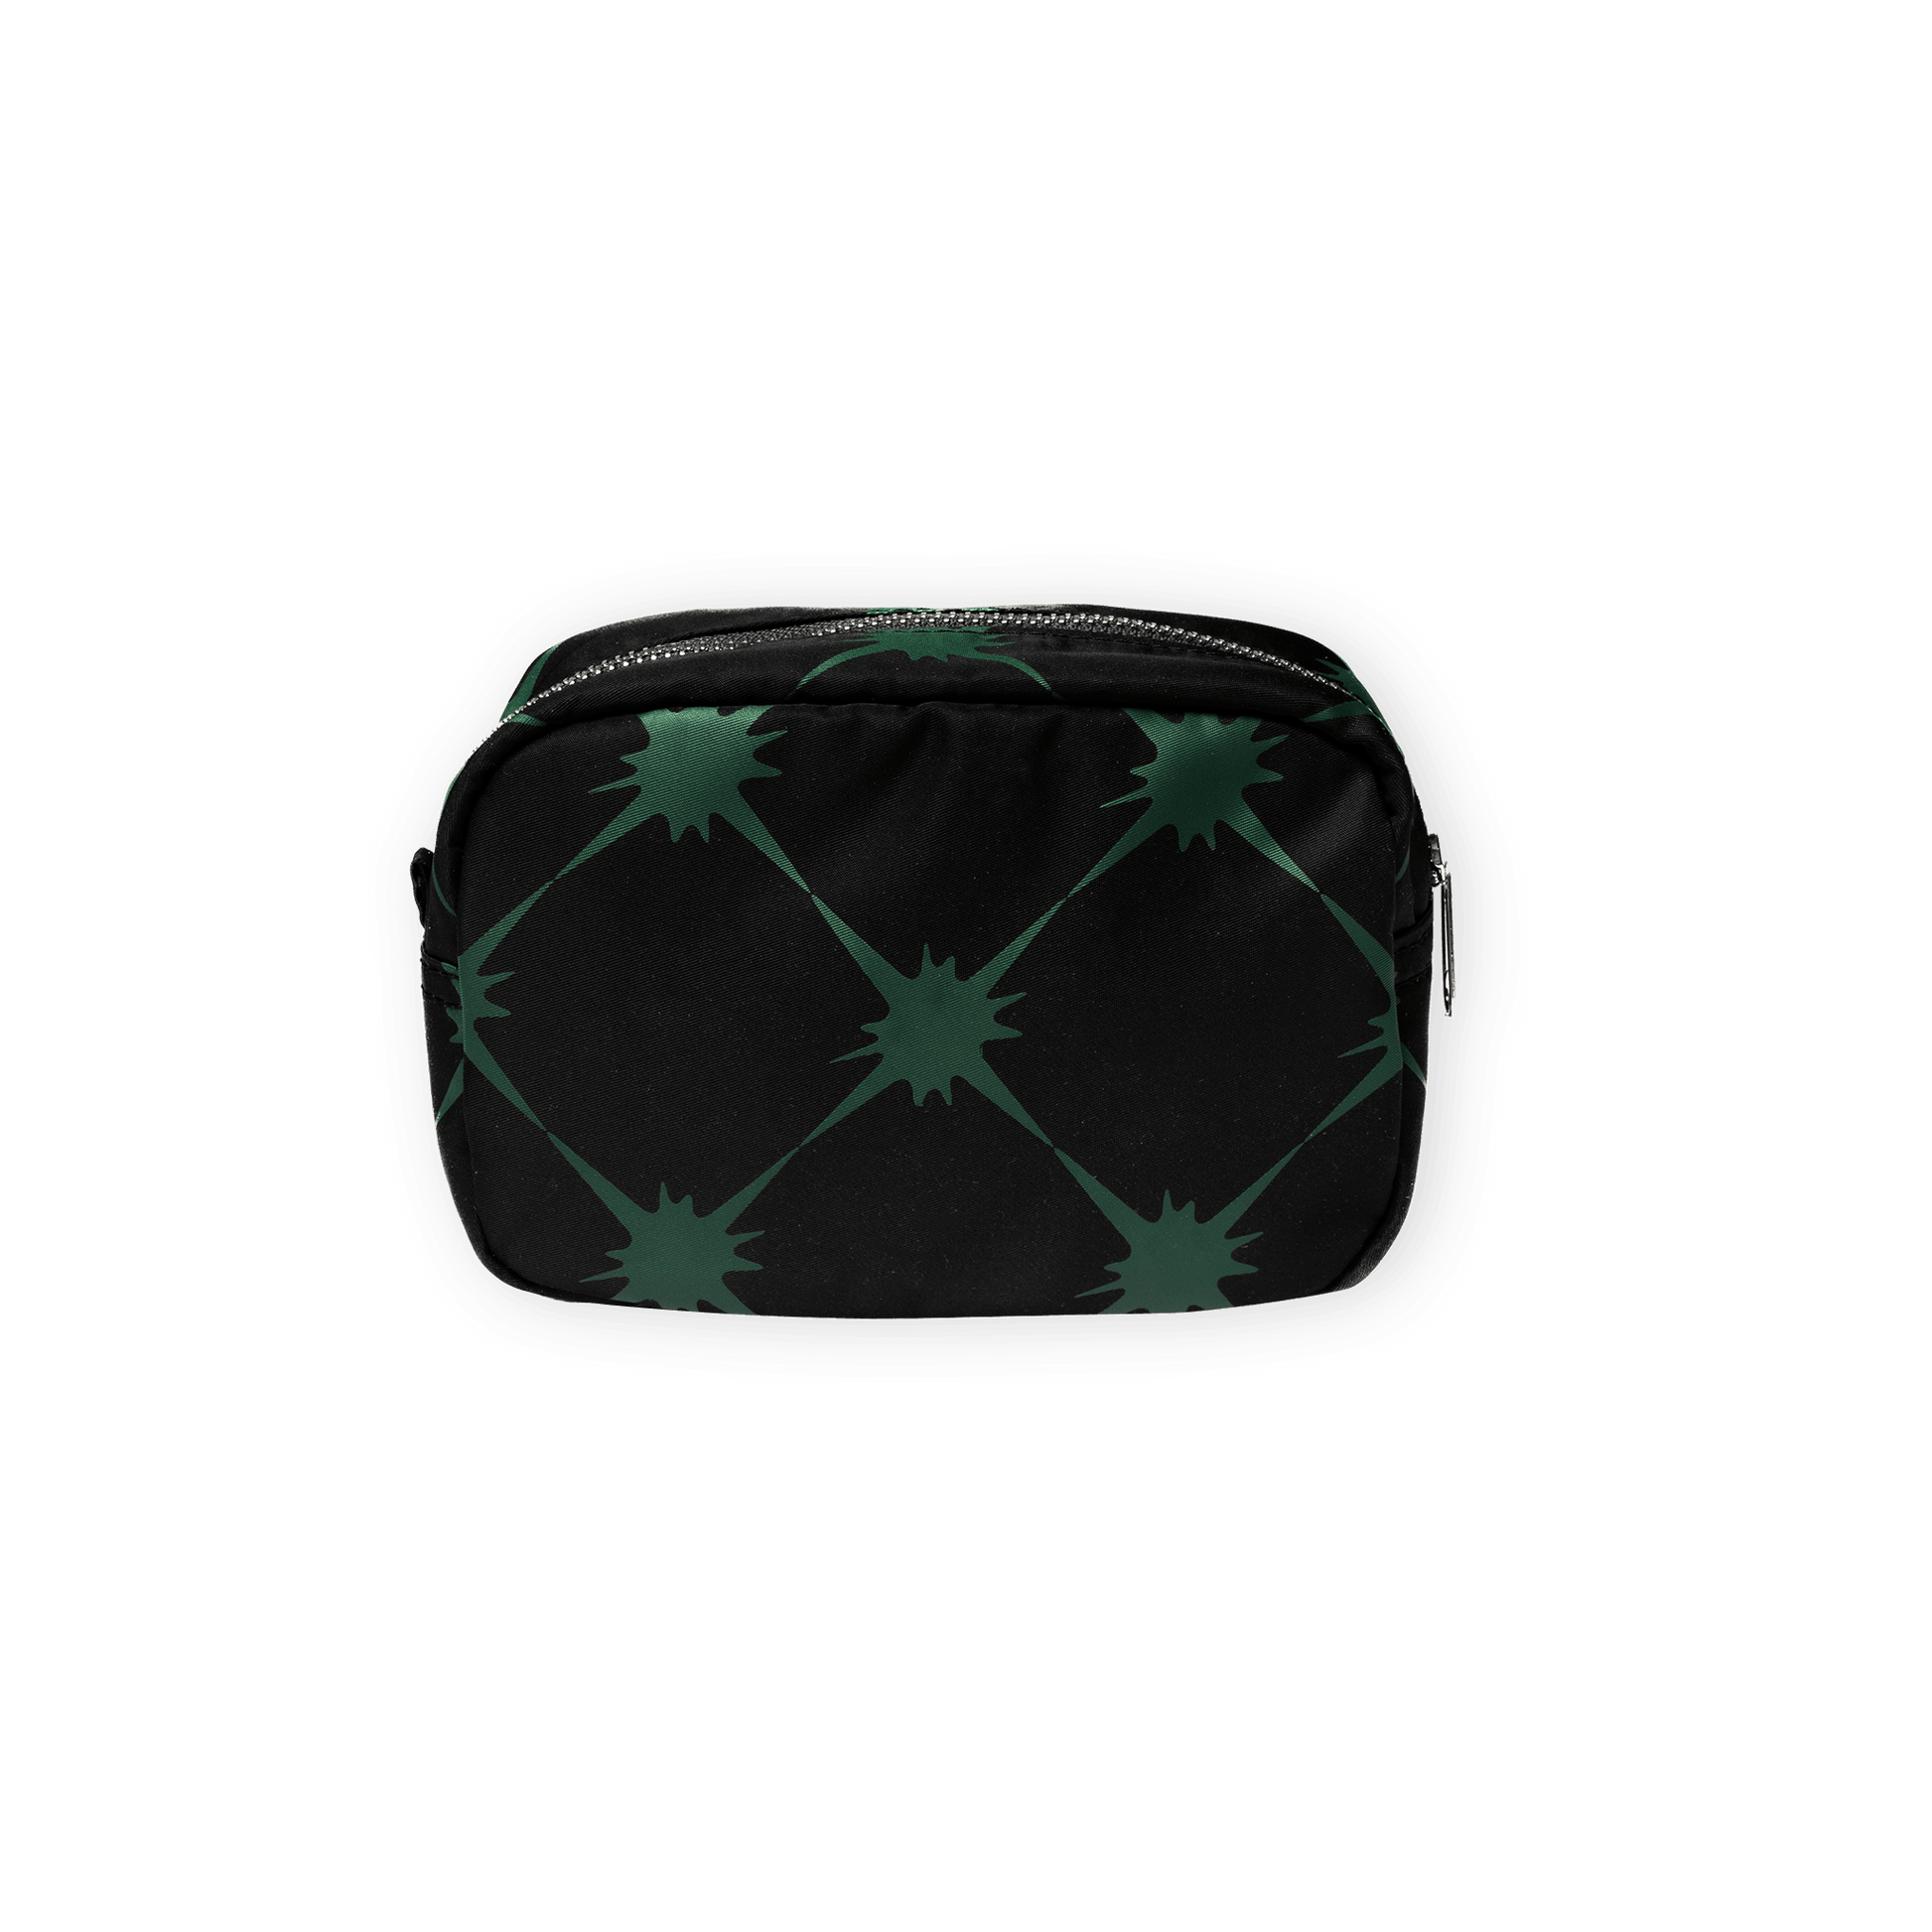 STARFIELD TRAVEL POUCH - LARGE - Billionaire Girls Club Exclusives